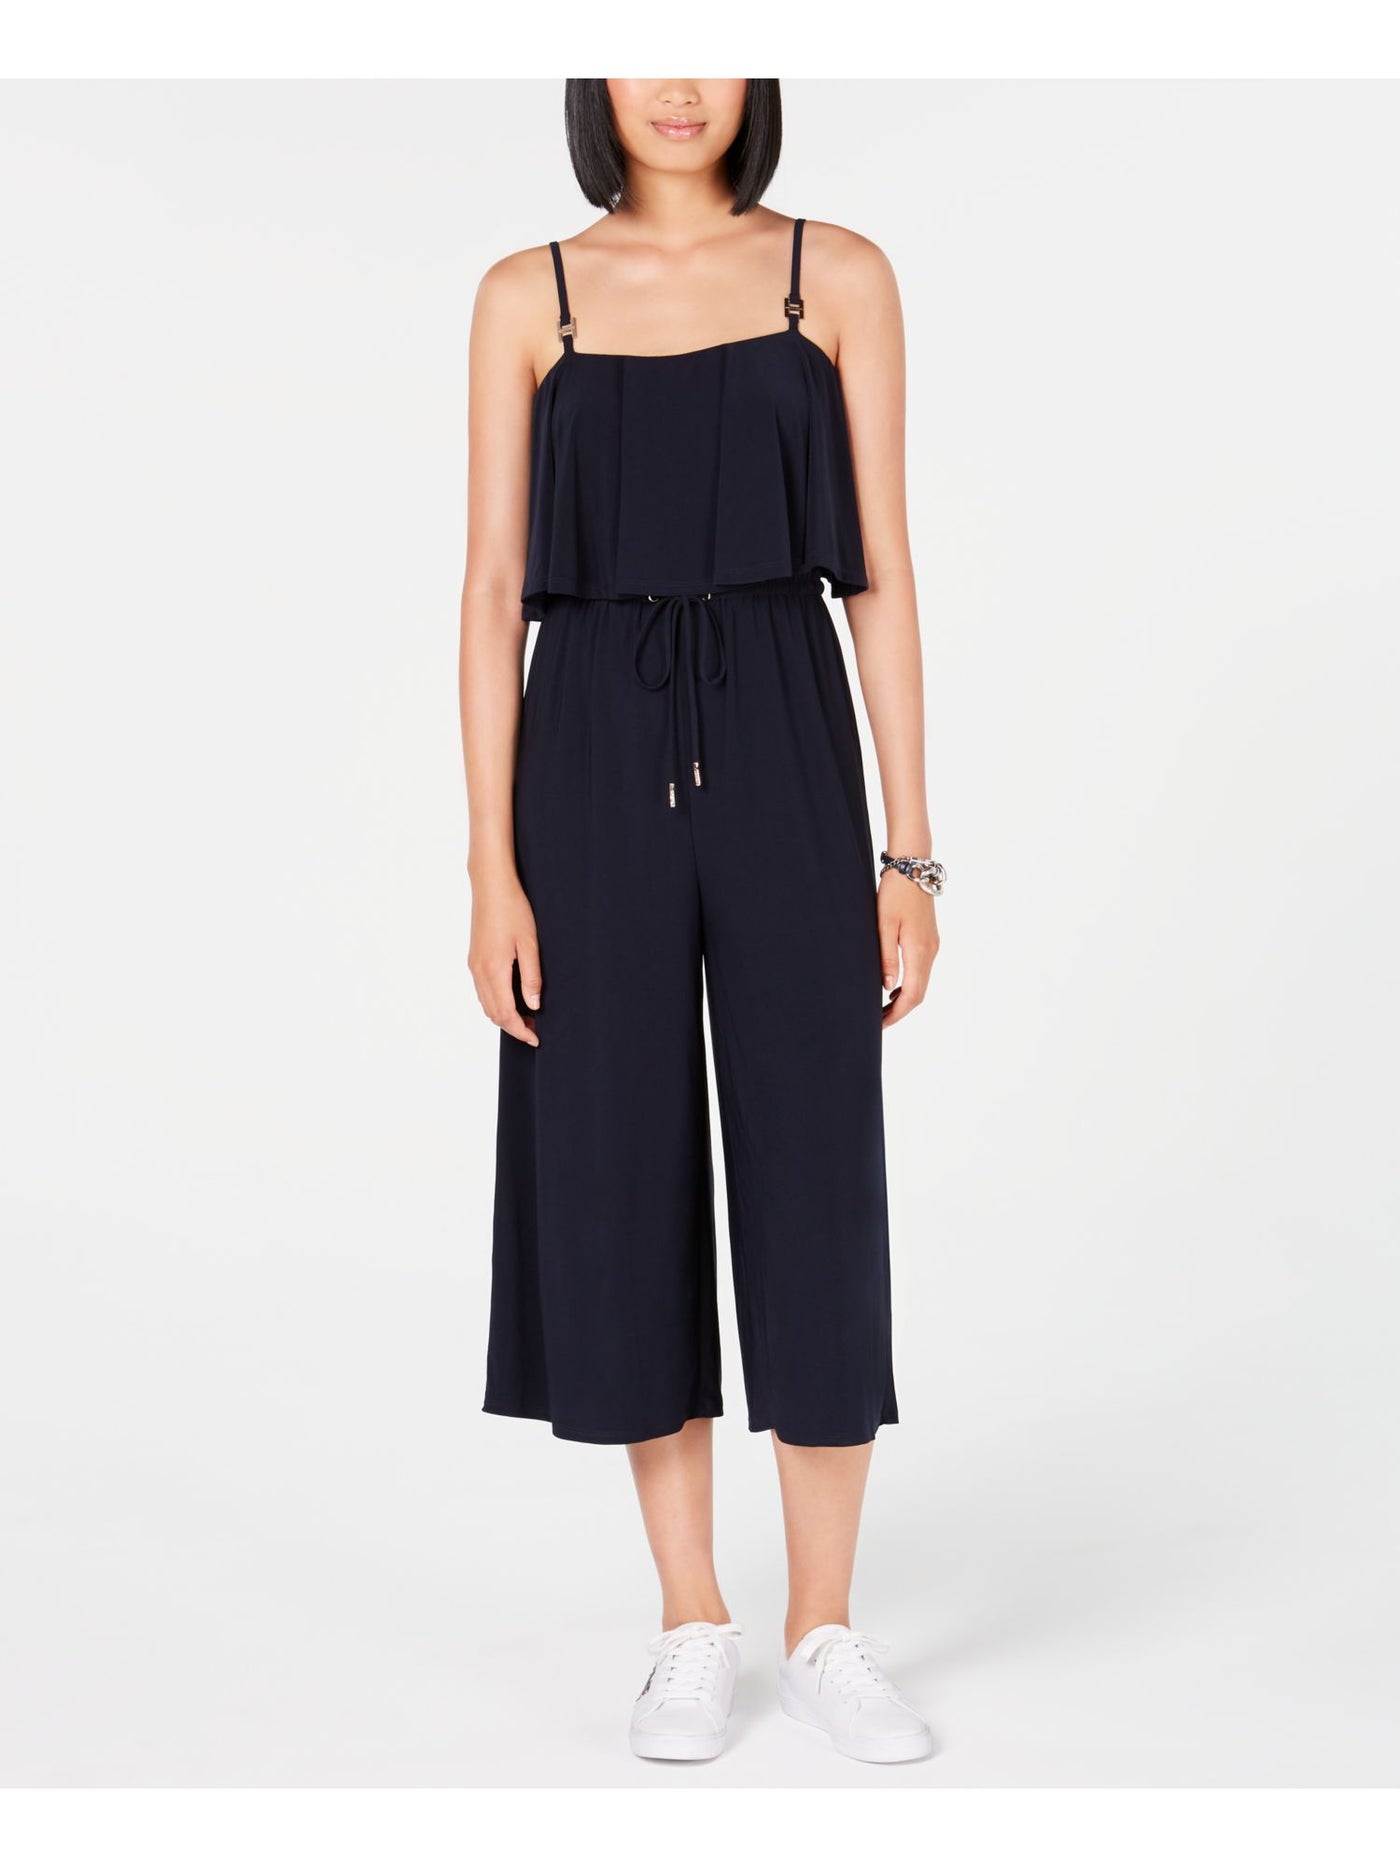 TOMMY HILFIGER Womens Navy Stretch Tie Popover Cropped Spaghetti Strap Square Neck Evening Wide Leg Jumpsuit M